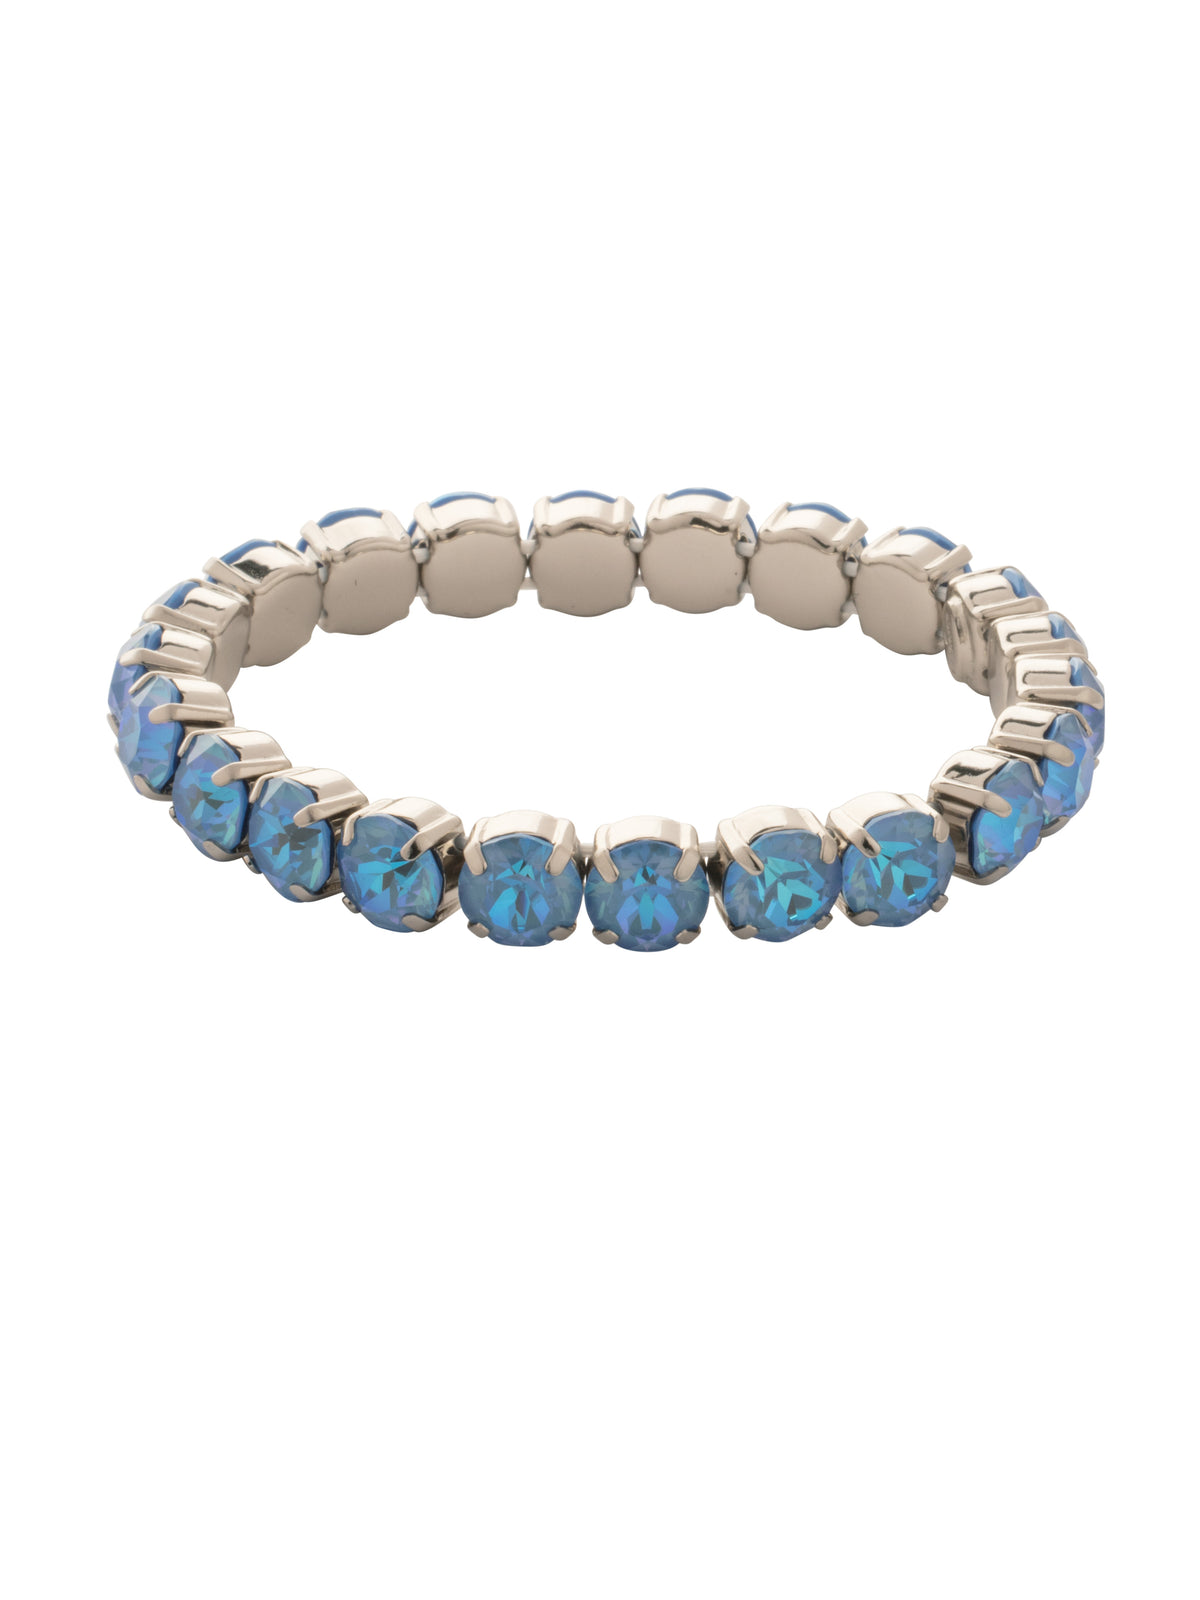 7 inch Sienna Stretch Bracelet - BFD50PDOCD - <p>A modern take on a classic style, the Sienna Stretch Bracelet features a line of crystals on a sturdy jewelers' filament, stretching to fit most wrists comfortably, without the hassle of a clasp! (7 inches in diameter, fits average wrist sizes) From Sorrelli's Ocean Delite collection in our Palladium finish.</p>